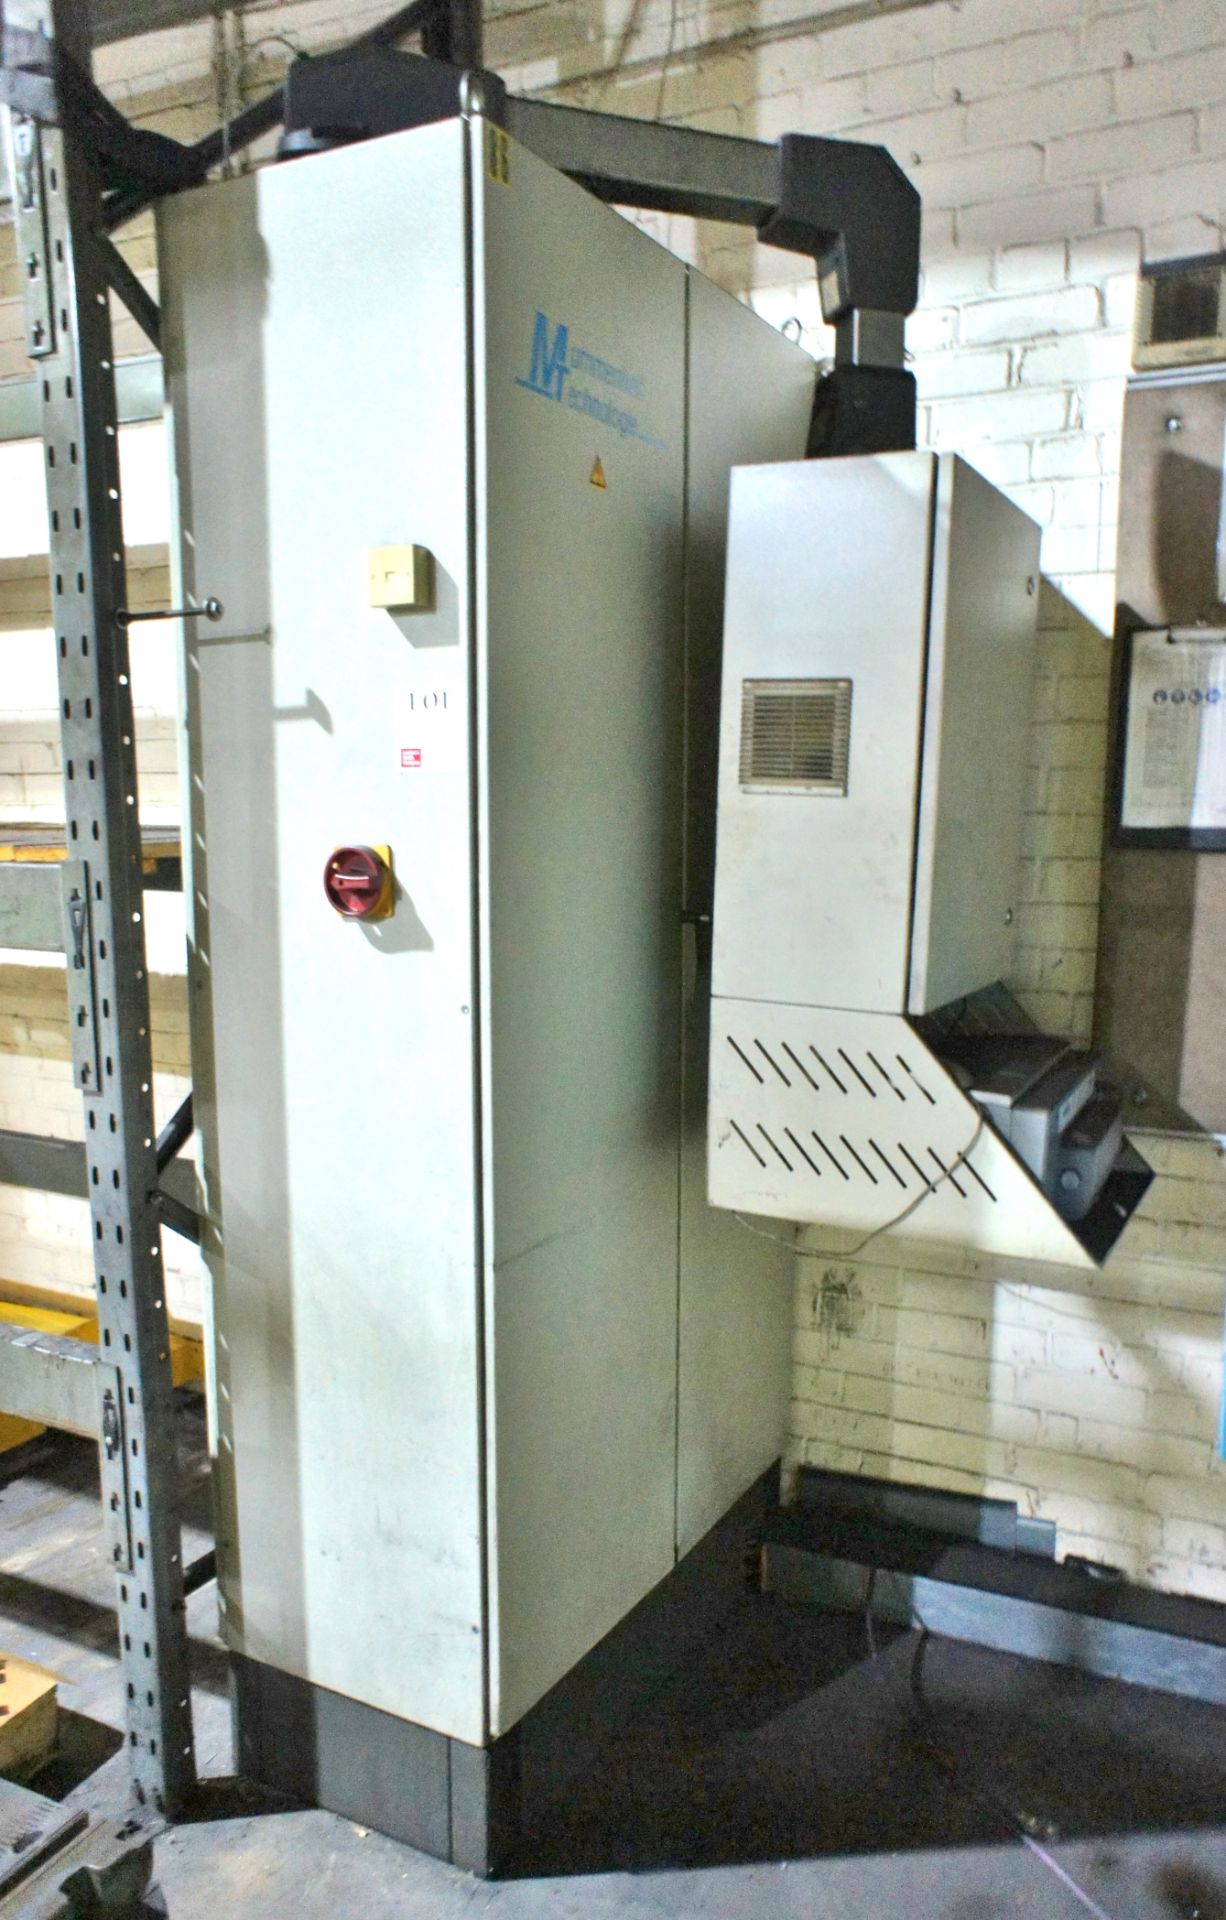 Mummenhoff Technologies PSR 700 automatic smithing and tensioning machine, Serial no. 10309 (2003) - Image 7 of 9